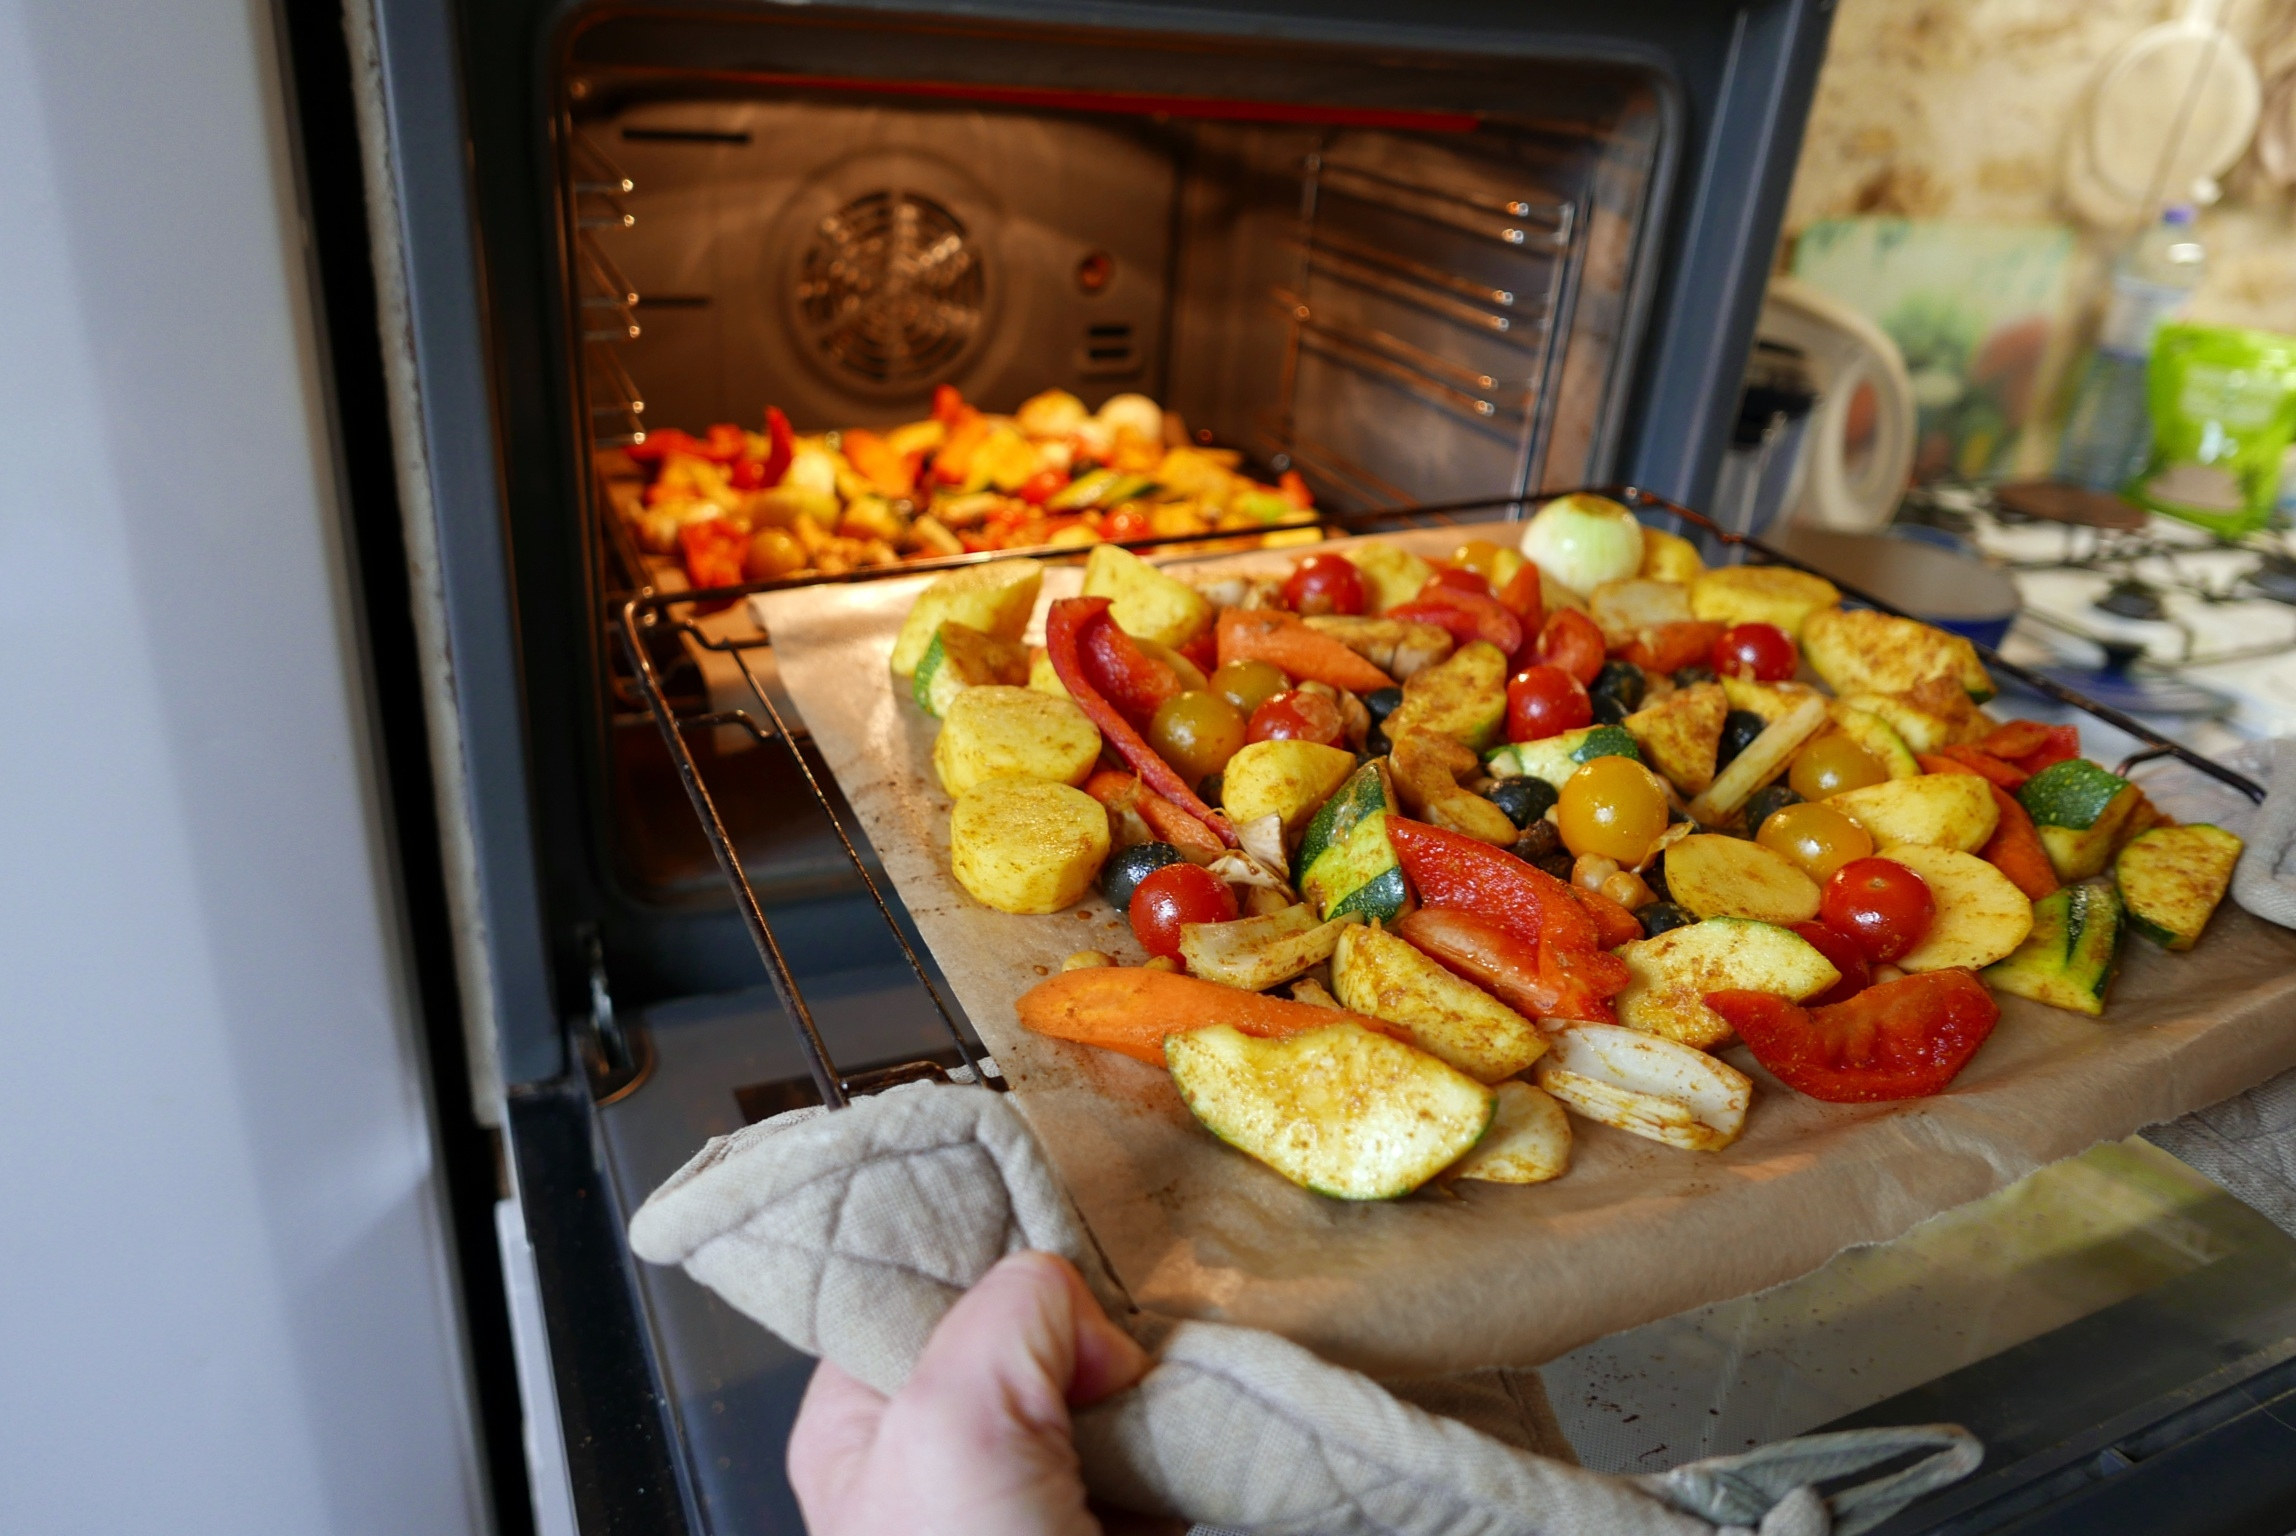 Removing vegetables from the oven.